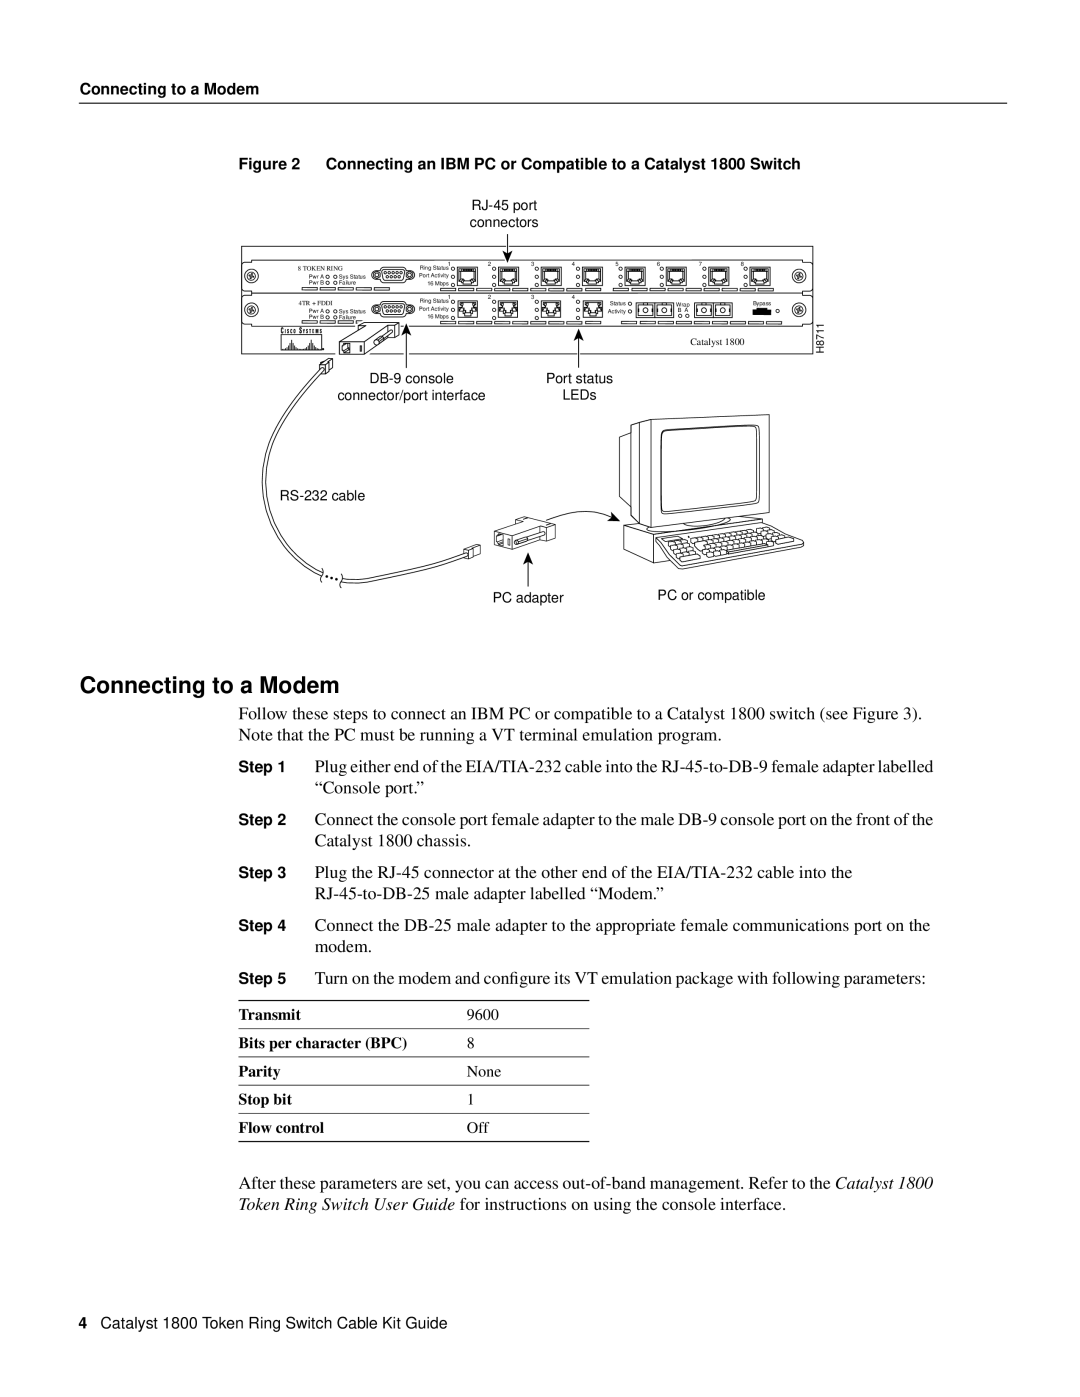 Cisco Systems EIA/TIA-232 manual Connecting to a Modem, Catalyst 1800 Token Ring Switch Cable Kit Guide 